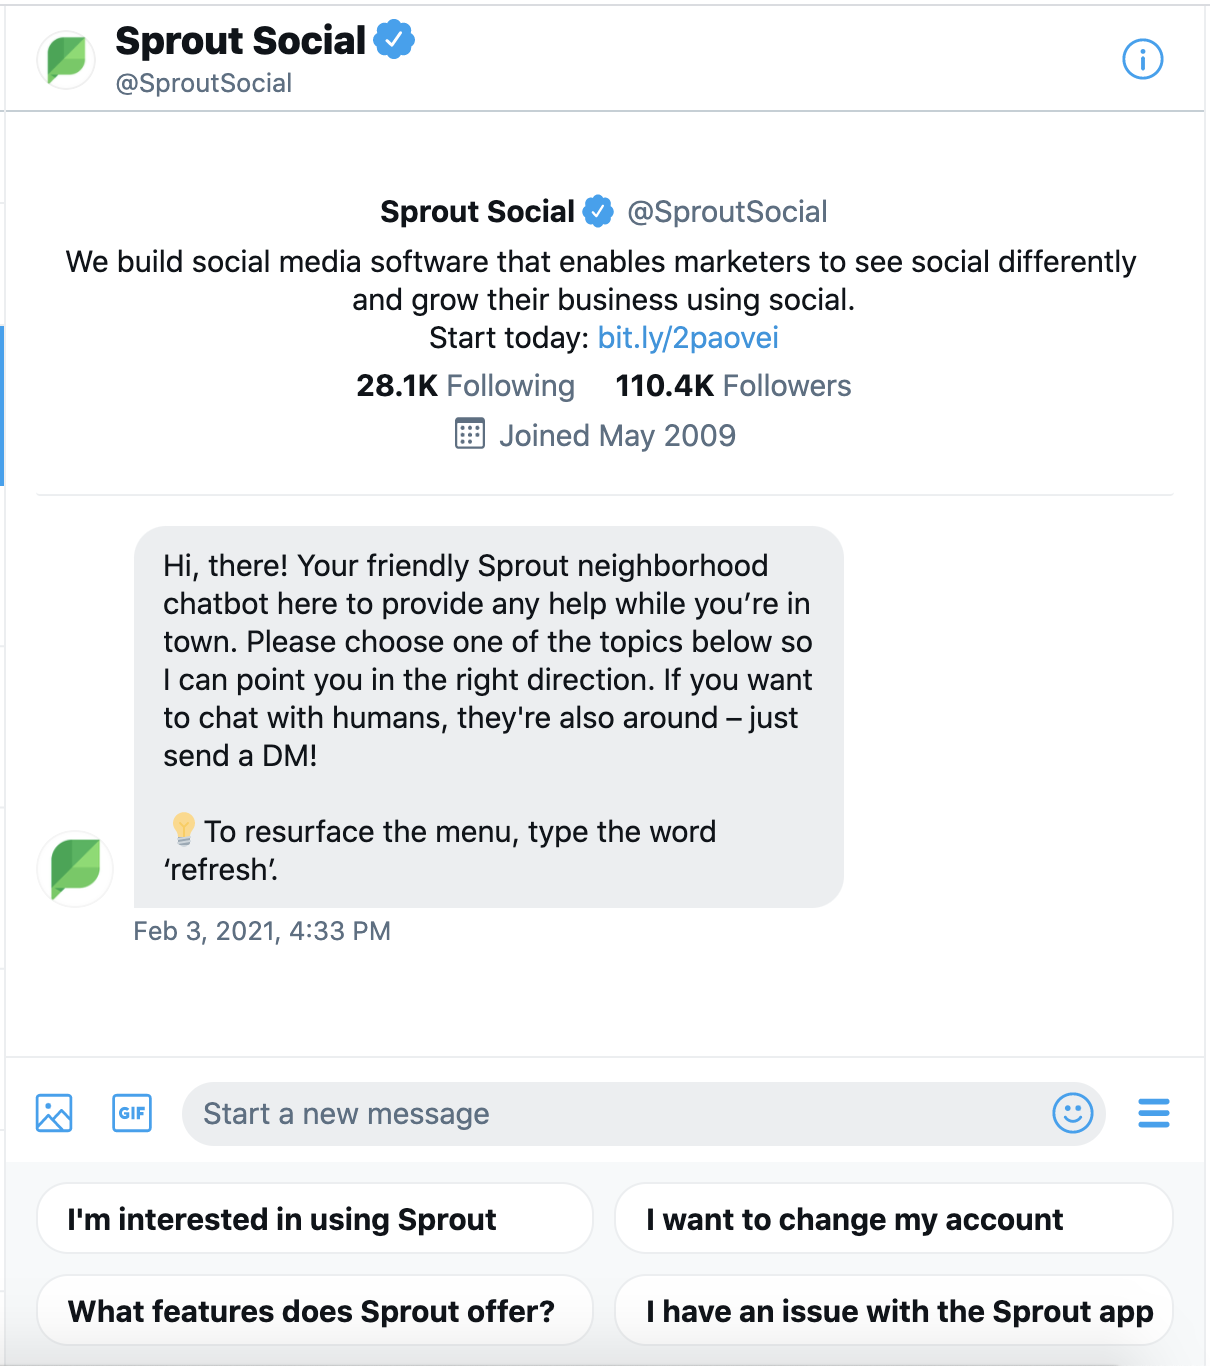 A screenshot of Sprout Social's Twitter chatbot. The automated message says, "Hi, there! Your friendly Sprout neighborhood chatbot here to provide any help while you’re in town. Please choose one of the topics below so I can point you in the right direction. If you want to chat with humans, they're also around – just send a DM! To resurface the menu, type the word ‘refresh’."